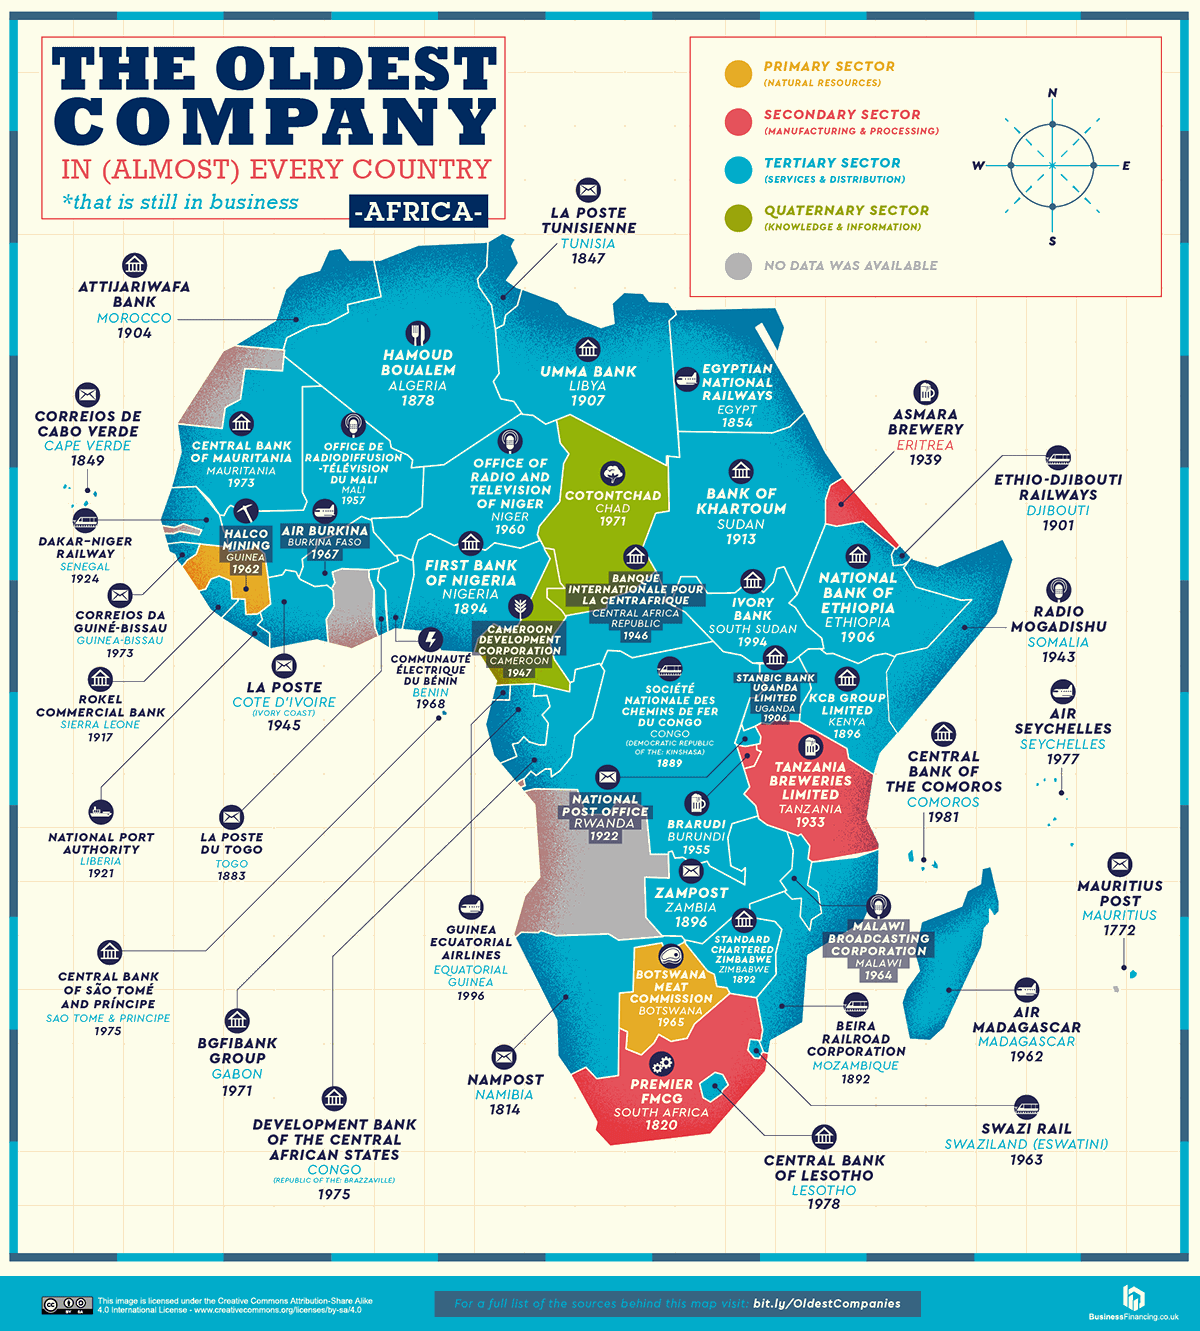 These maps show the oldest companies in the world (and in almost every country) | DeviceDaily.com